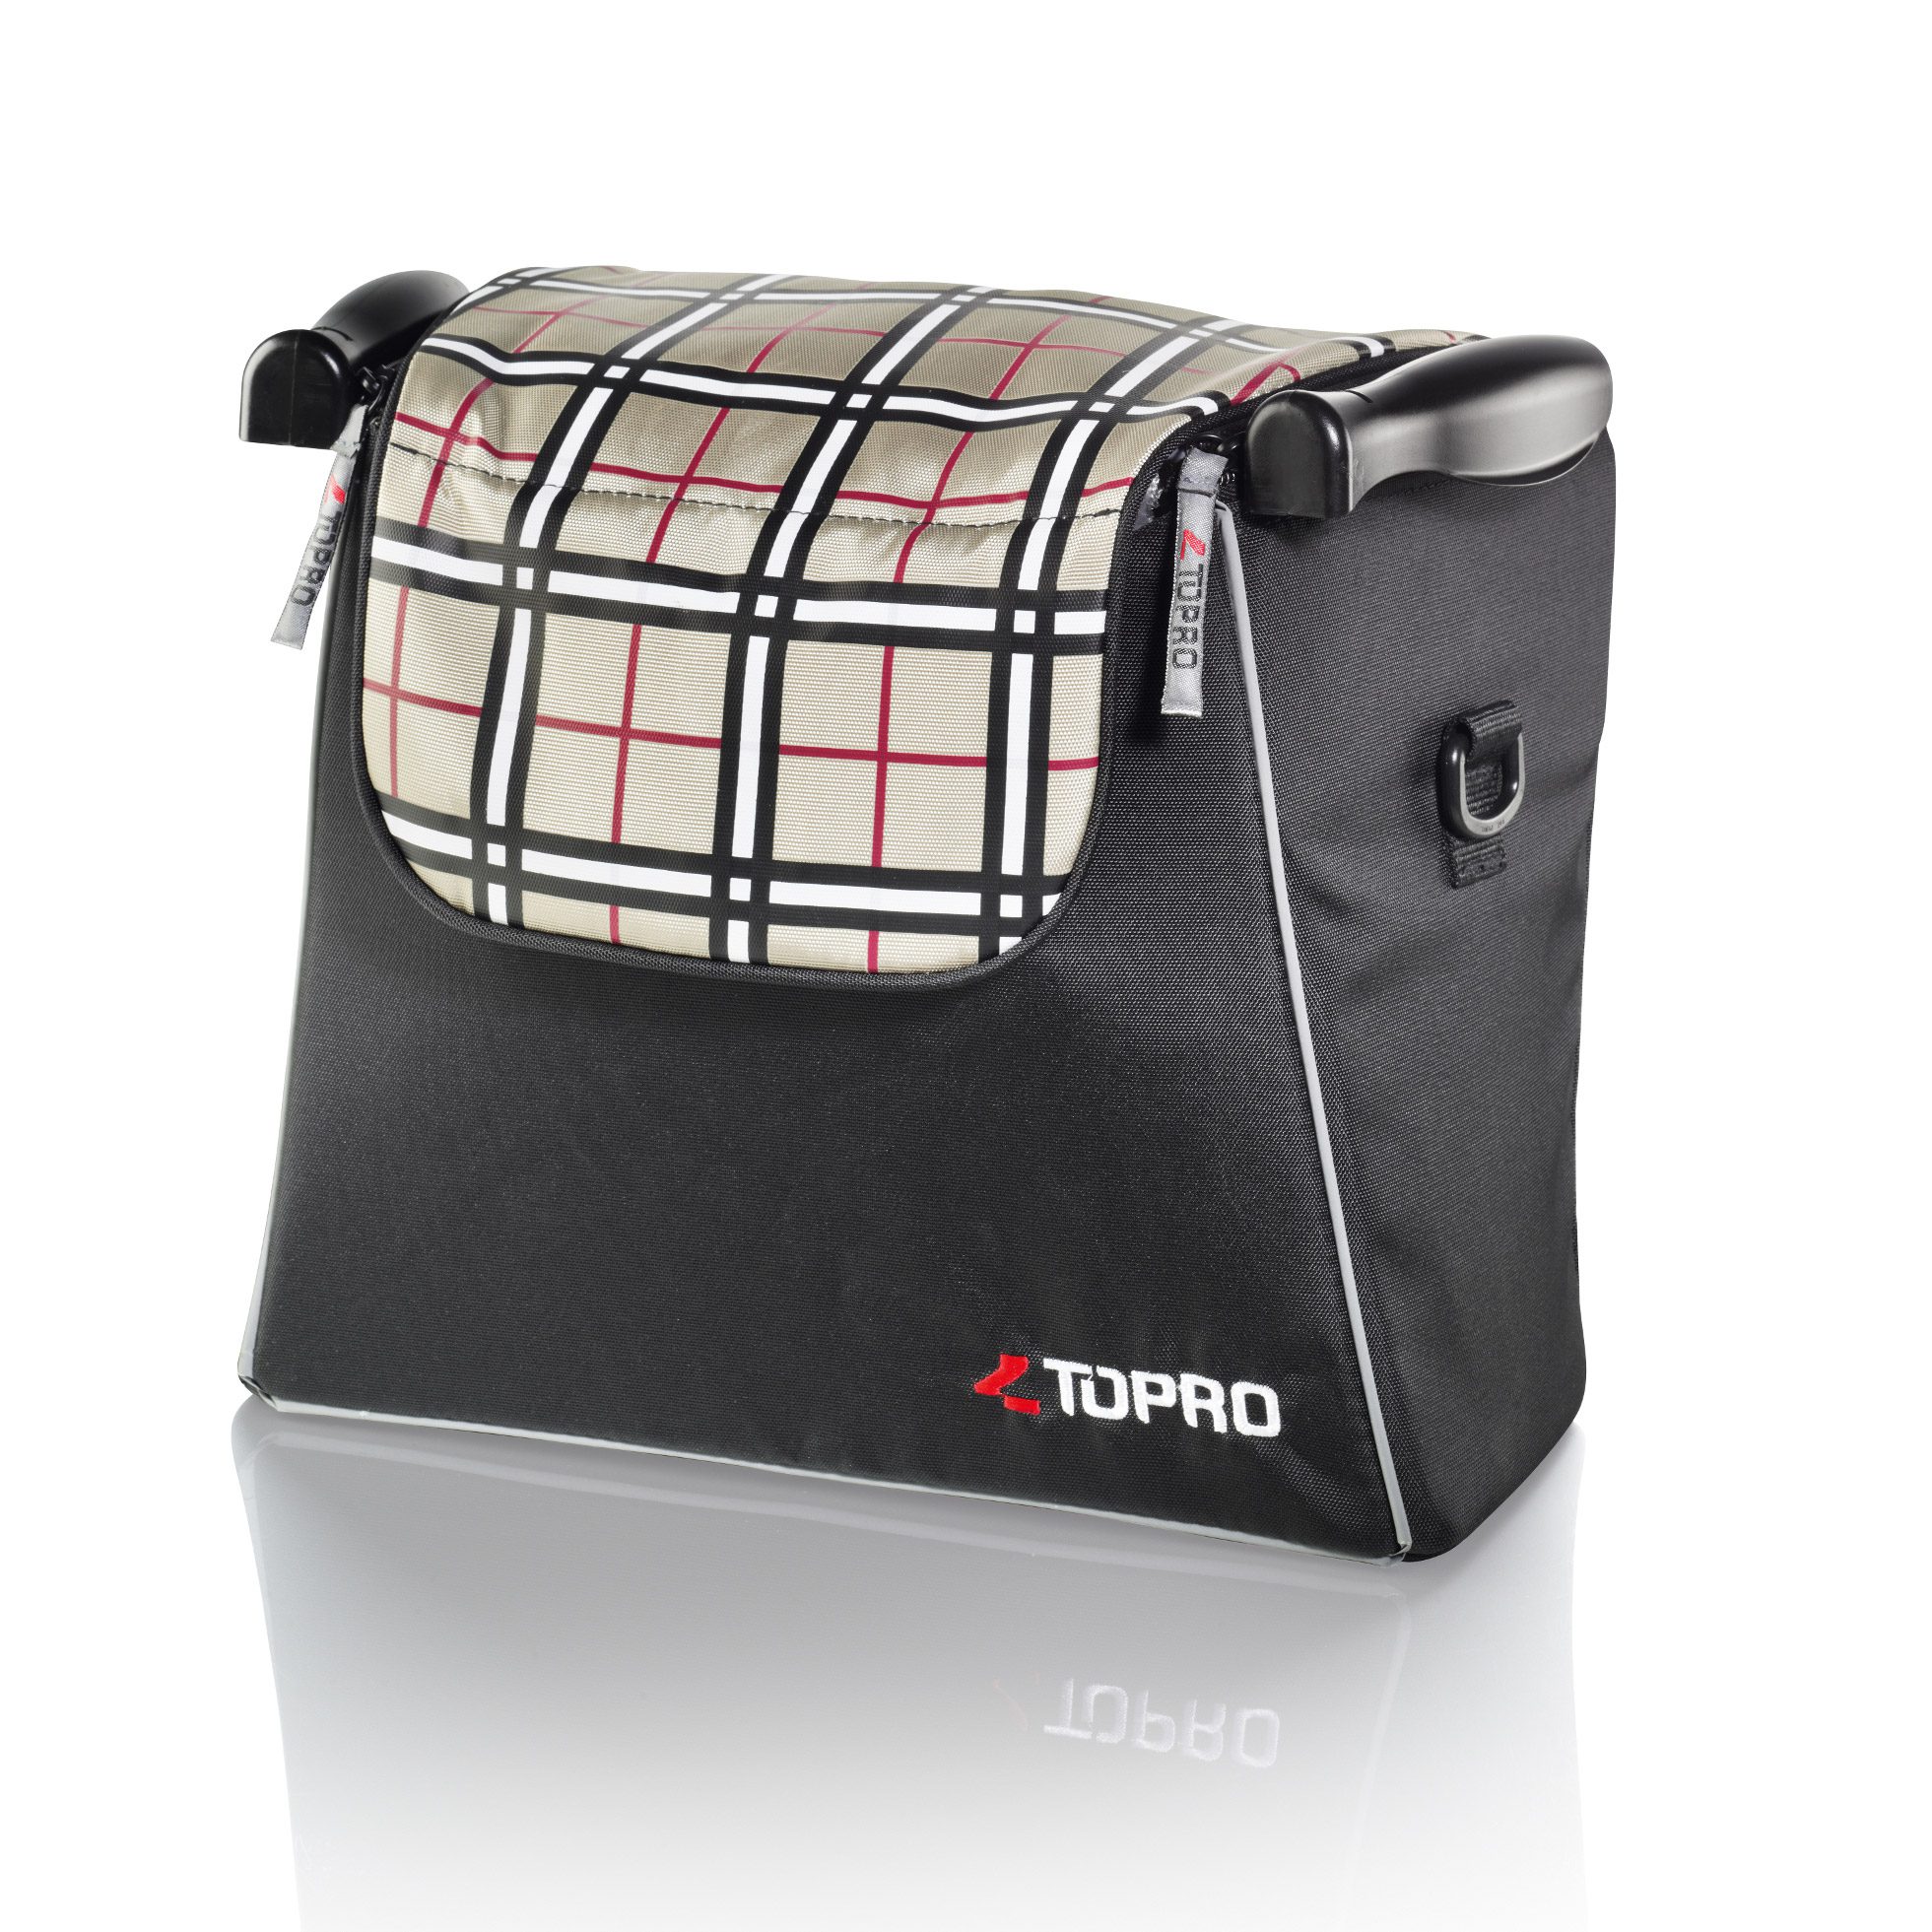 Topro Rollator Replacement Bags - The perfect accessory from your local Topro stockist